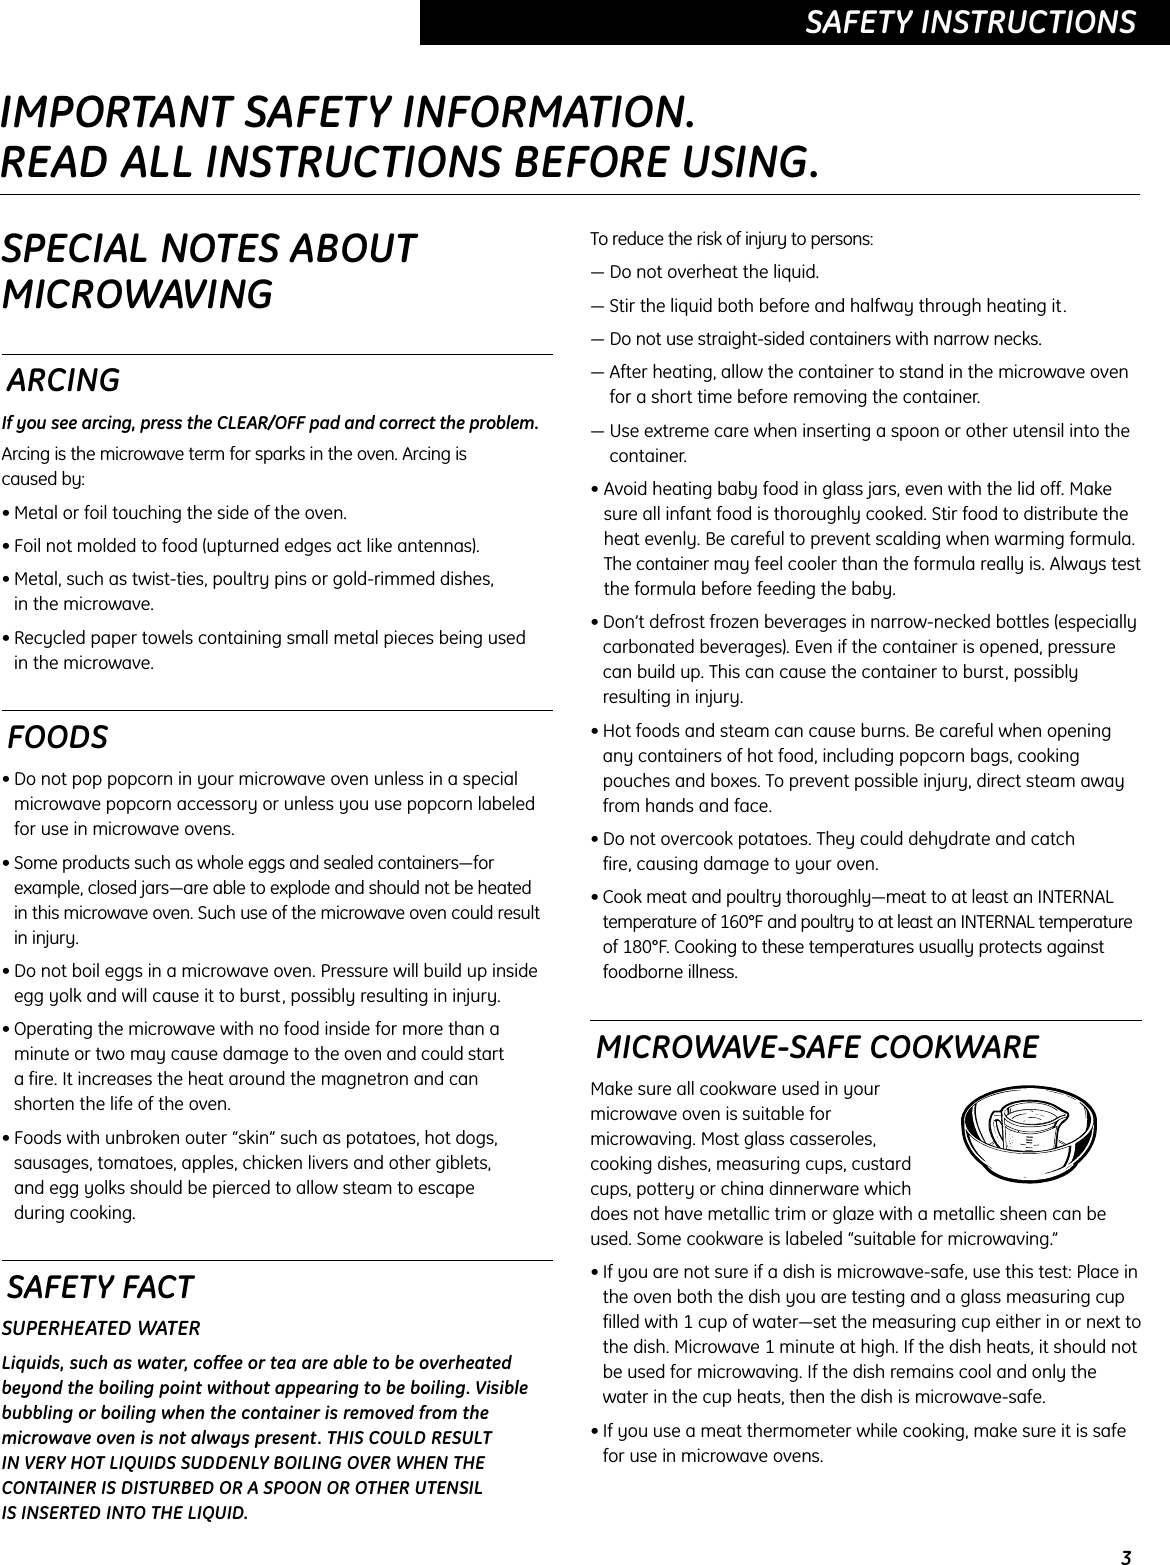 3SAFETY INSTRUCTIONSSPECIAL NOTES ABOUTMICROWAVINGARCINGIf you see arcing, press the CLEAR/OFF pad and correct the problem.Arcing is the microwave term for sparks in the oven. Arcing is caused by:• Metal or foil touching the side of the oven.• Foil not molded to food (upturned edges act like antennas).• Metal, such as twist-ties, poultry pins or gold-rimmed dishes, in the microwave.• Recycled paper towels containing small metal pieces being used in the microwave.FOODS• Do not pop popcorn in your microwave oven unless in a specialmicrowave popcorn accessory or unless you use popcorn labeledfor use in microwave ovens.• Some products such as whole eggs and sealed containers—forexample, closed jars—are able to explode and should not be heated in this microwave oven. Such use of the microwave oven could resultin injury.• Do not boil eggs in a microwave oven. Pressure will build up insideegg yolk and will cause it to burst, possibly resulting in injury.• Operating the microwave with no food inside for more than aminute or two may cause damage to the oven and could start a fire. It increases the heat around the magnetron and can shorten the life of the oven.• Foods with unbroken outer “skin” such as potatoes, hot dogs,sausages, tomatoes, apples, chicken livers and other giblets, and egg yolks should be pierced to allow steam to escape during cooking.SAFETY FACTSUPERHEATED WATERLiquids, such as water, coffee or tea are able to be overheatedbeyond the boiling point without appearing to be boiling. Visiblebubbling or boiling when the container is removed from themicrowave oven is not always present. THIS COULD RESULT IN VERY HOT LIQUIDS SUDDENLY BOILING OVER WHEN THECONTAINER IS DISTURBED OR A SPOON OR OTHER UTENSIL IS INSERTED INTO THE LIQUID.To reduce the risk of injury to persons:— Do not overheat the liquid.— Stir the liquid both before and halfway through heating it.— Do not use straight-sided containers with narrow necks.— After heating, allow the container to stand in the microwave ovenfor a short time before removing the container.— Use extreme care when inserting a spoon or other utensil into thecontainer.• Avoid heating baby food in glass jars, even with the lid off. Makesure all infant food is thoroughly cooked. Stir food to distribute theheat evenly. Be careful to prevent scalding when warming formula.The container may feel cooler than the formula really is. Always testthe formula before feeding the baby.• Don’t defrost frozen beverages in narrow-necked bottles (especiallycarbonated beverages). Even if the container is opened, pressurecan build up. This can cause the container to burst, possiblyresulting in injury.• Hot foods and steam can cause burns. Be careful when opening any containers of hot food, including popcorn bags, cookingpouches and boxes. To prevent possible injury, direct steam awayfrom hands and face.• Do not overcook potatoes. They could dehydrate and catch fire, causing damage to your oven.• Cook meat and poultry thoroughly—meat to at least an INTERNAL temperature of 160°F and poultry to at least an INTERNAL temperature of 180°F. Cooking to these temperatures usually protects againstfoodborne illness.MICROWAVE-SAFE COOKWAREMake sure all cookware used in yourmicrowave oven is suitable formicrowaving. Most glass casseroles,cooking dishes, measuring cups, custardcups, pottery or china dinnerware whichdoes not have metallic trim or glaze with a metallic sheen can beused. Some cookware is labeled “suitable for microwaving.”• If you are not sure if a dish is microwave-safe, use this test: Place inthe oven both the dish you are testing and a glass measuring cupfilled with 1 cup of water—set the measuring cup either in or next tothe dish. Microwave 1 minute at high. If the dish heats, it should notbe used for microwaving. If the dish remains cool and only thewater in the cup heats, then the dish is microwave-safe.• If you use a meat thermometer while cooking, make sure it is safefor use in microwave ovens.IMPORTANT SAFETY INFORMATION.READ ALL INSTRUCTIONS BEFORE USING.